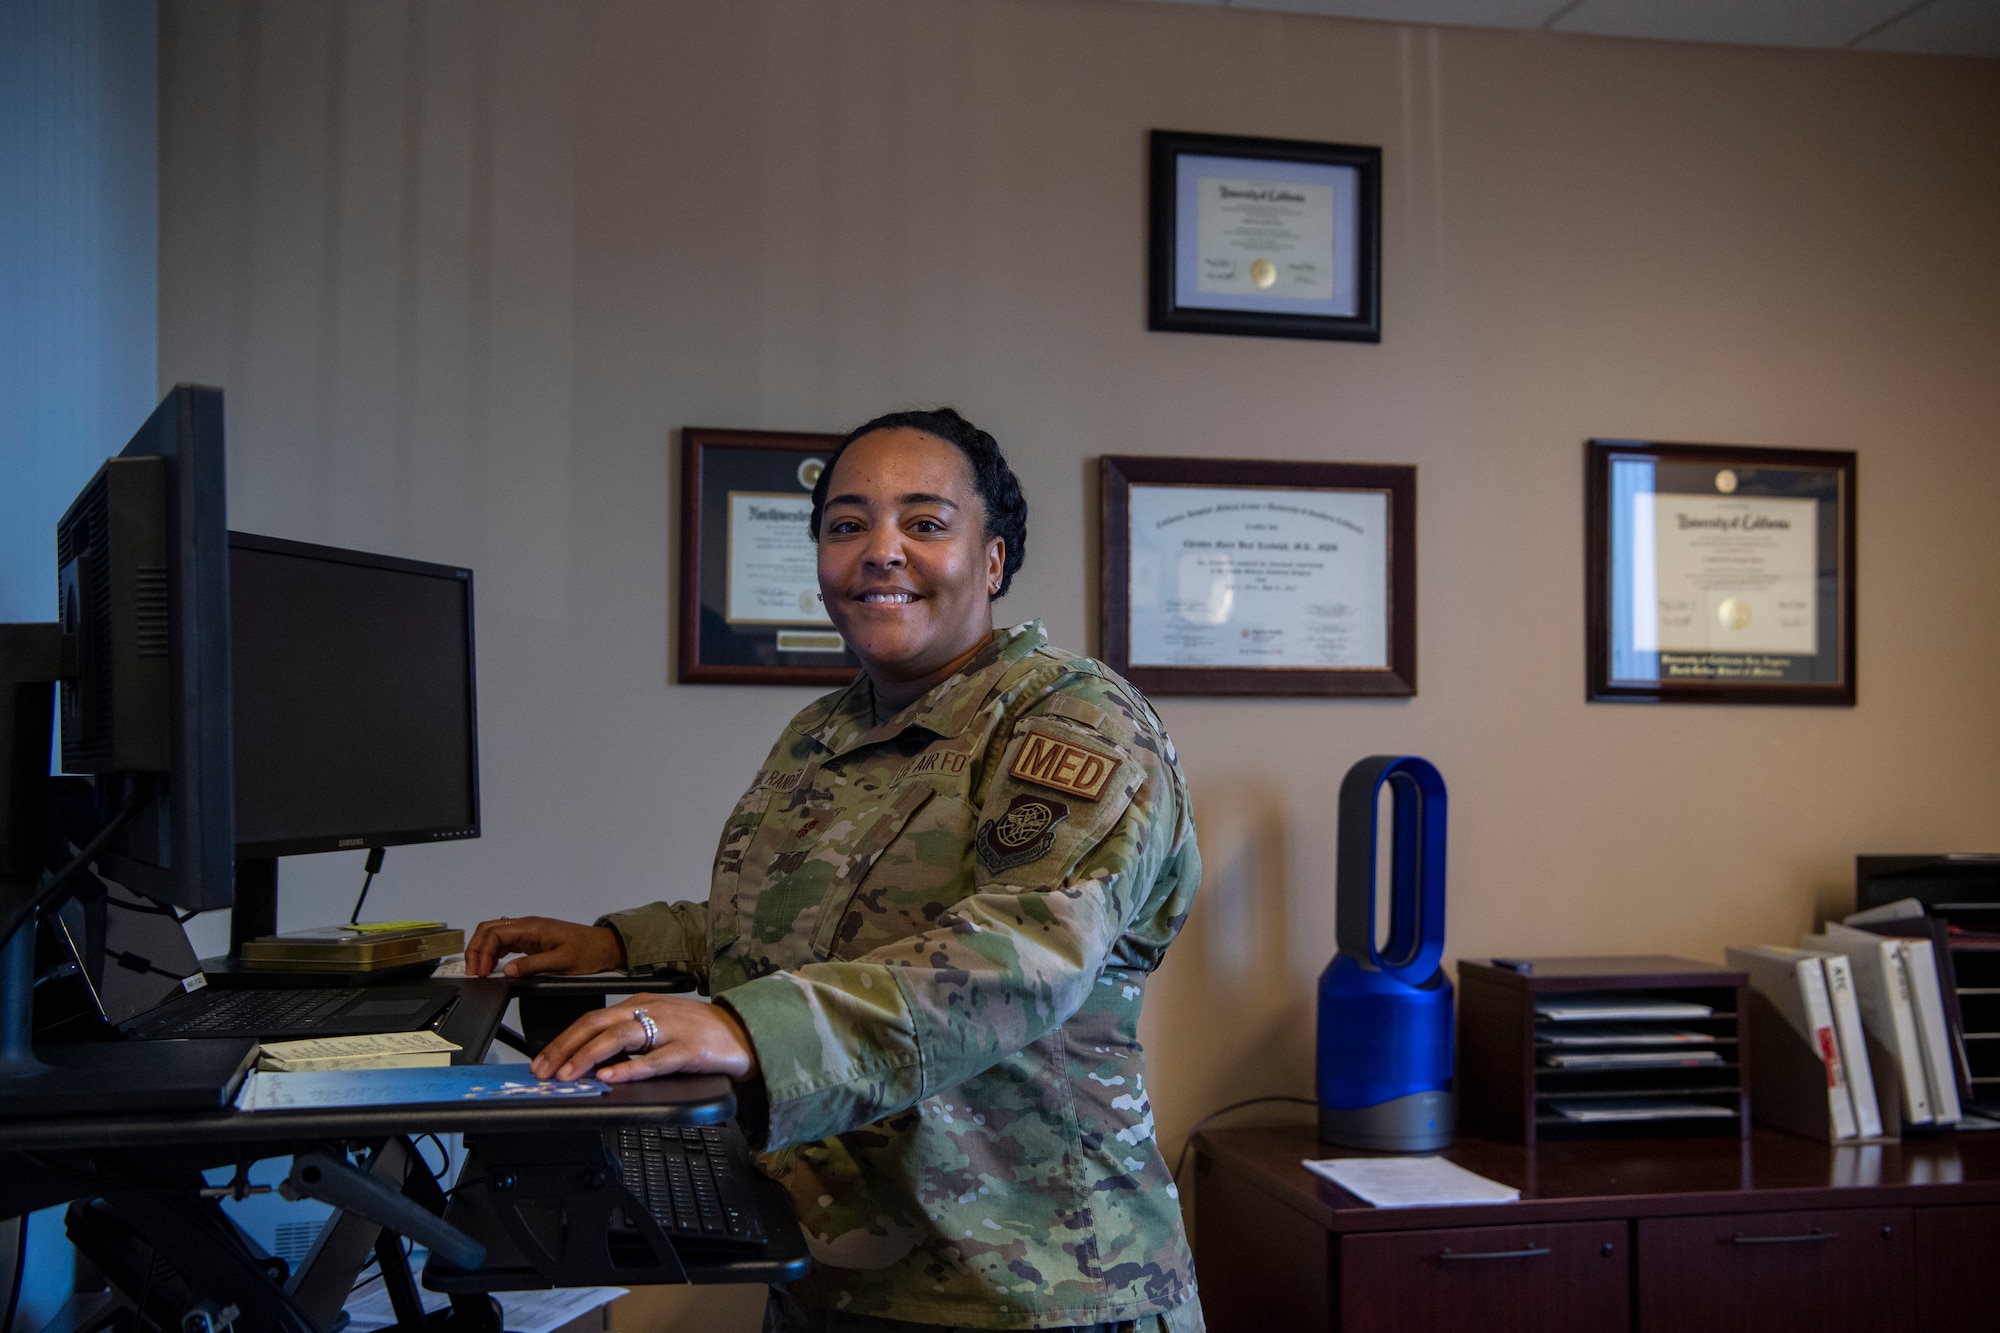 An airman poses for a photo by her computer in an office.